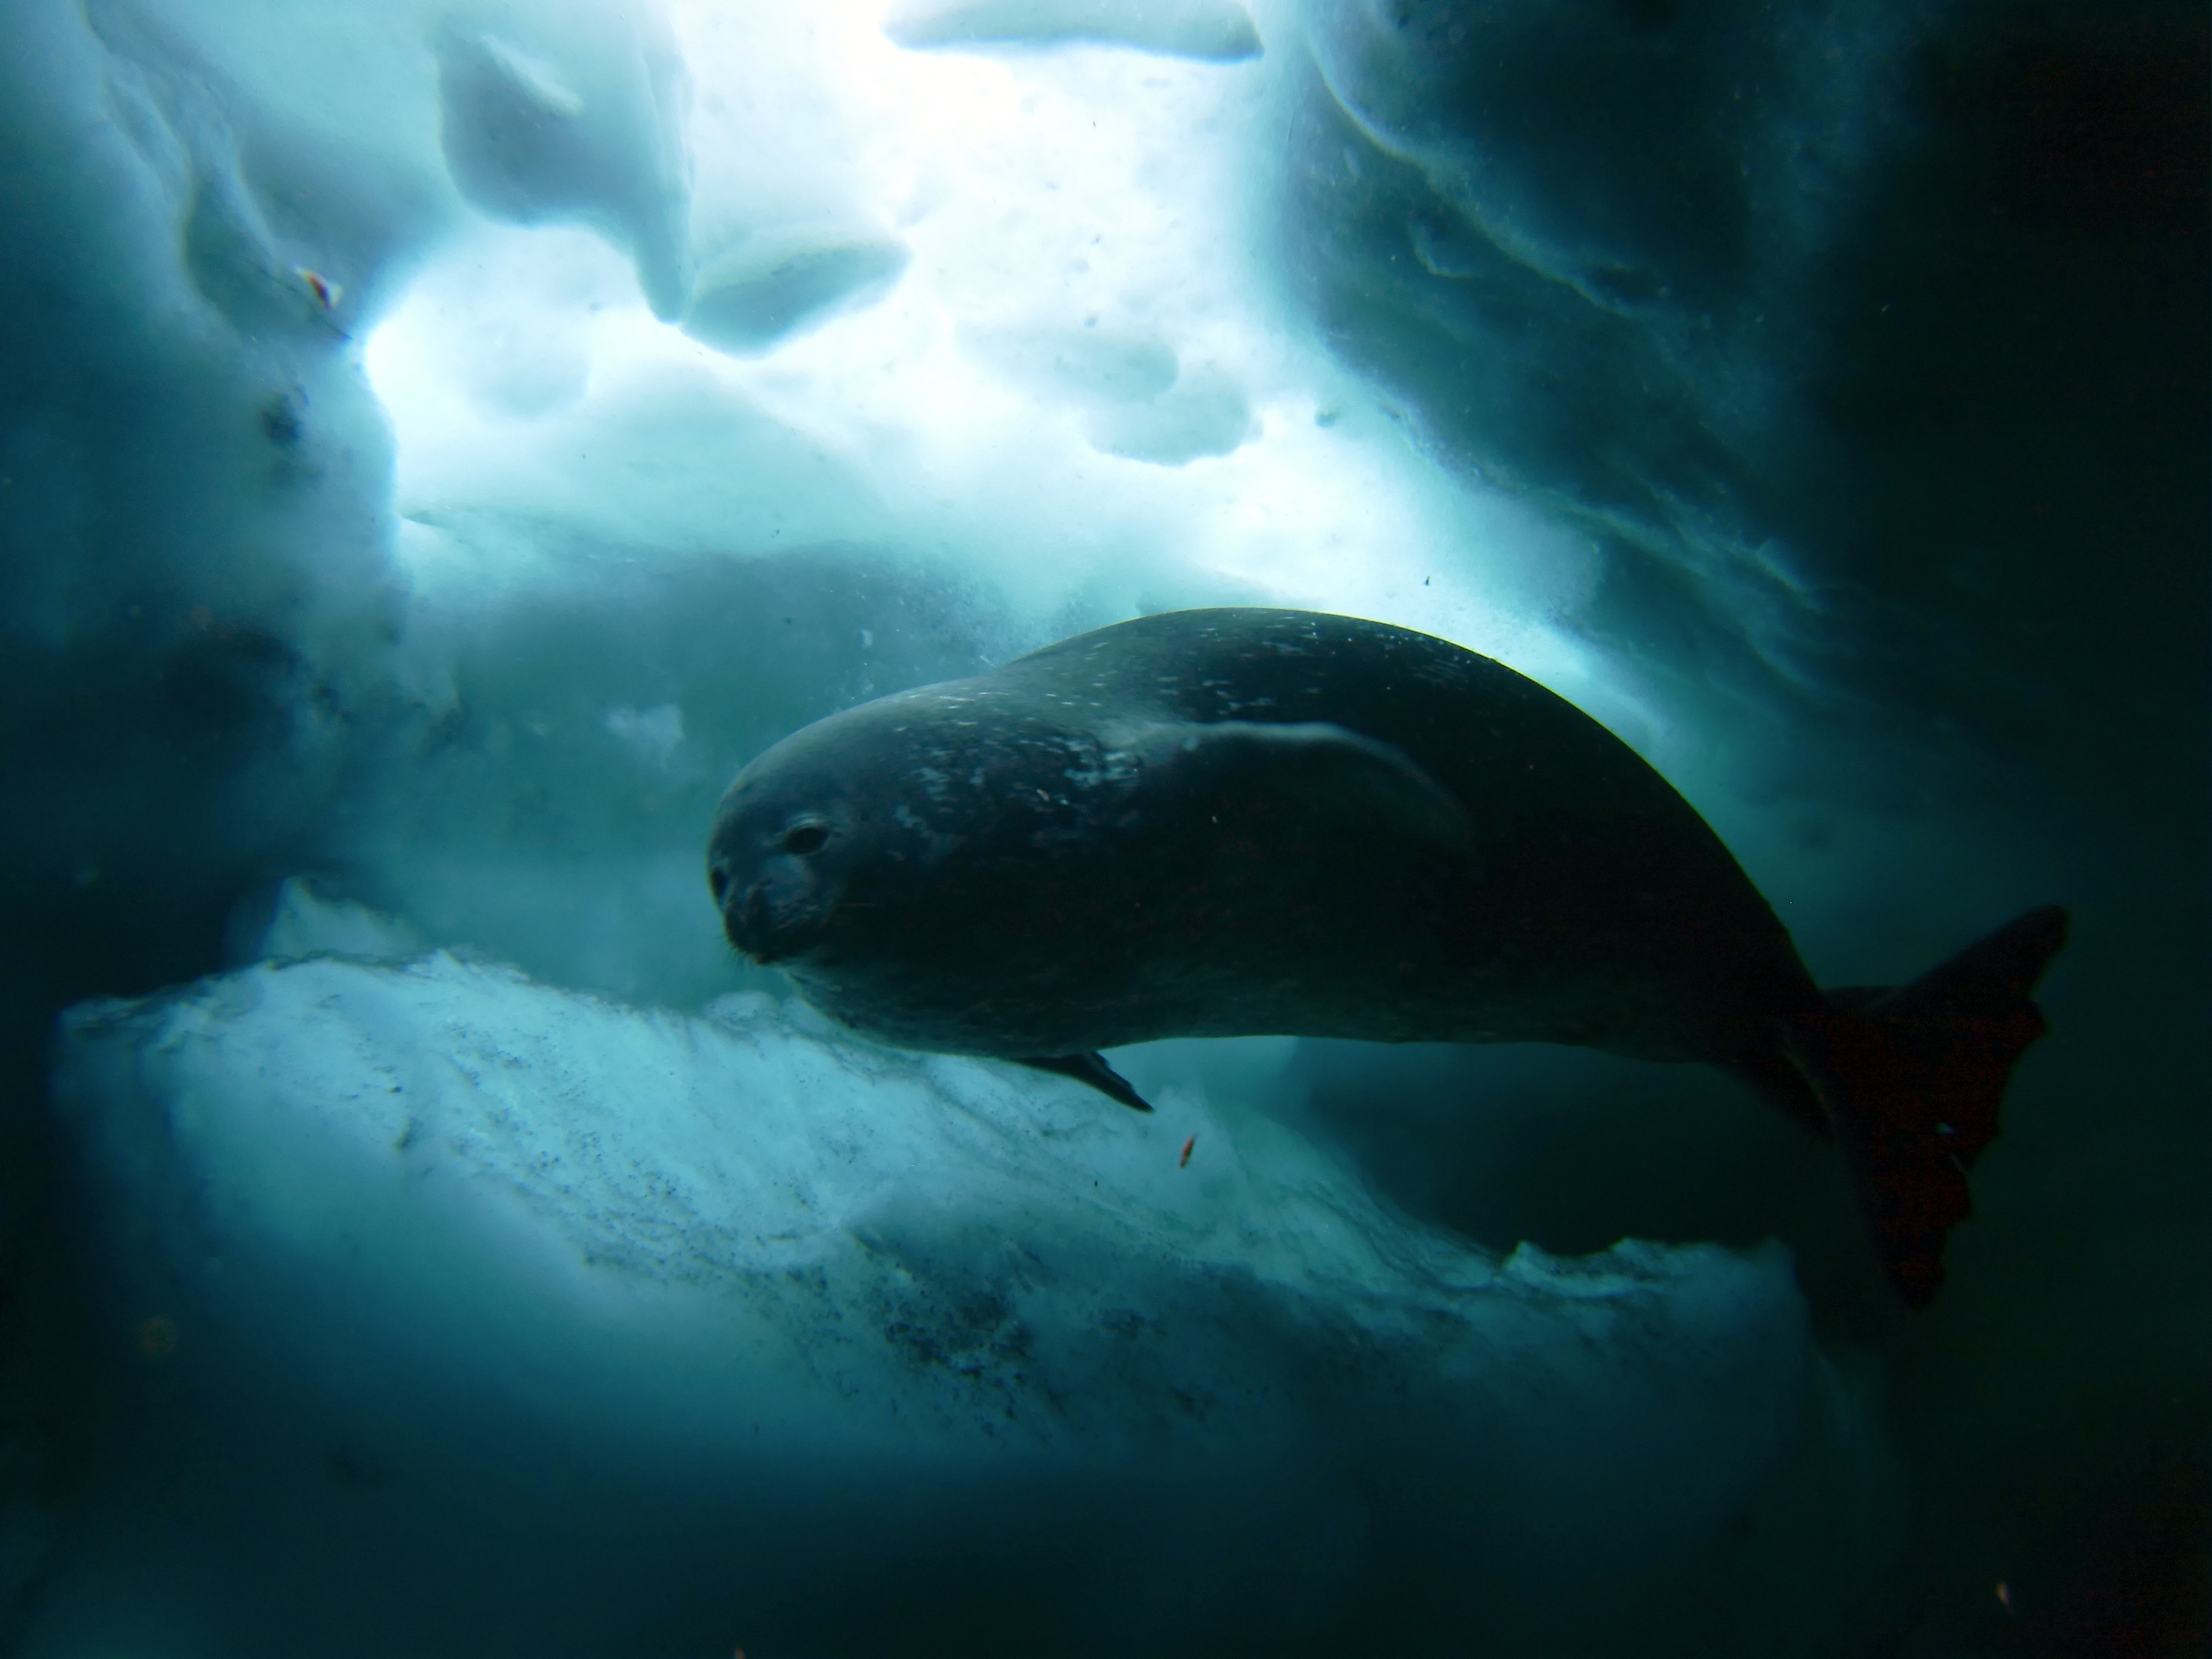 A seal swims in icy water.